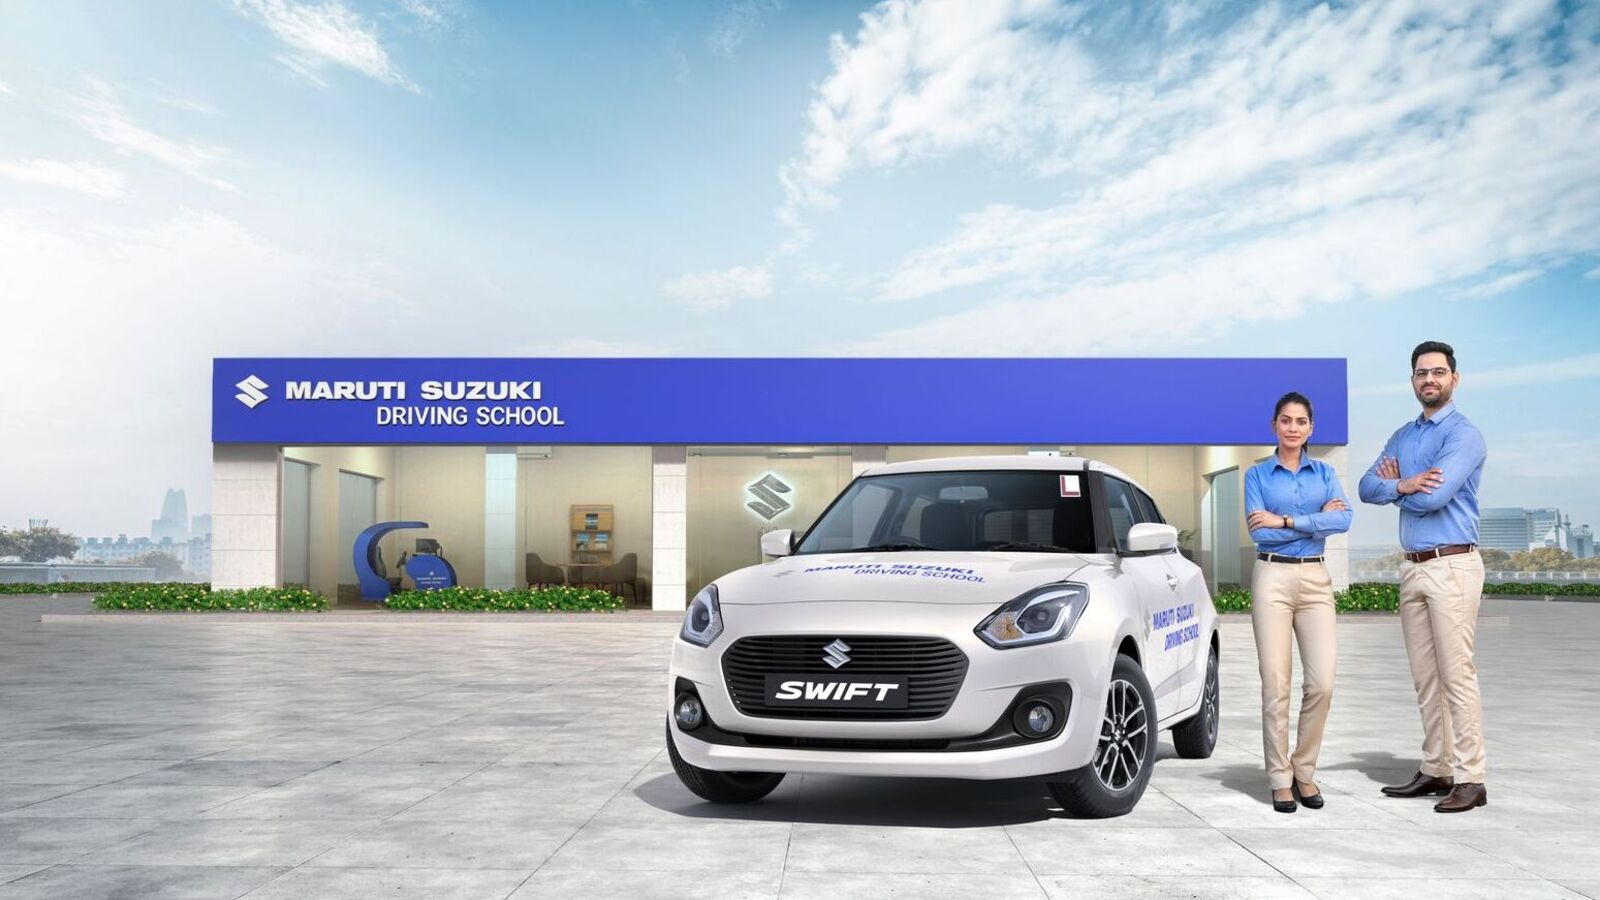 maruti suzuki now has 500 driving schools across india. why is this significant? | auto news